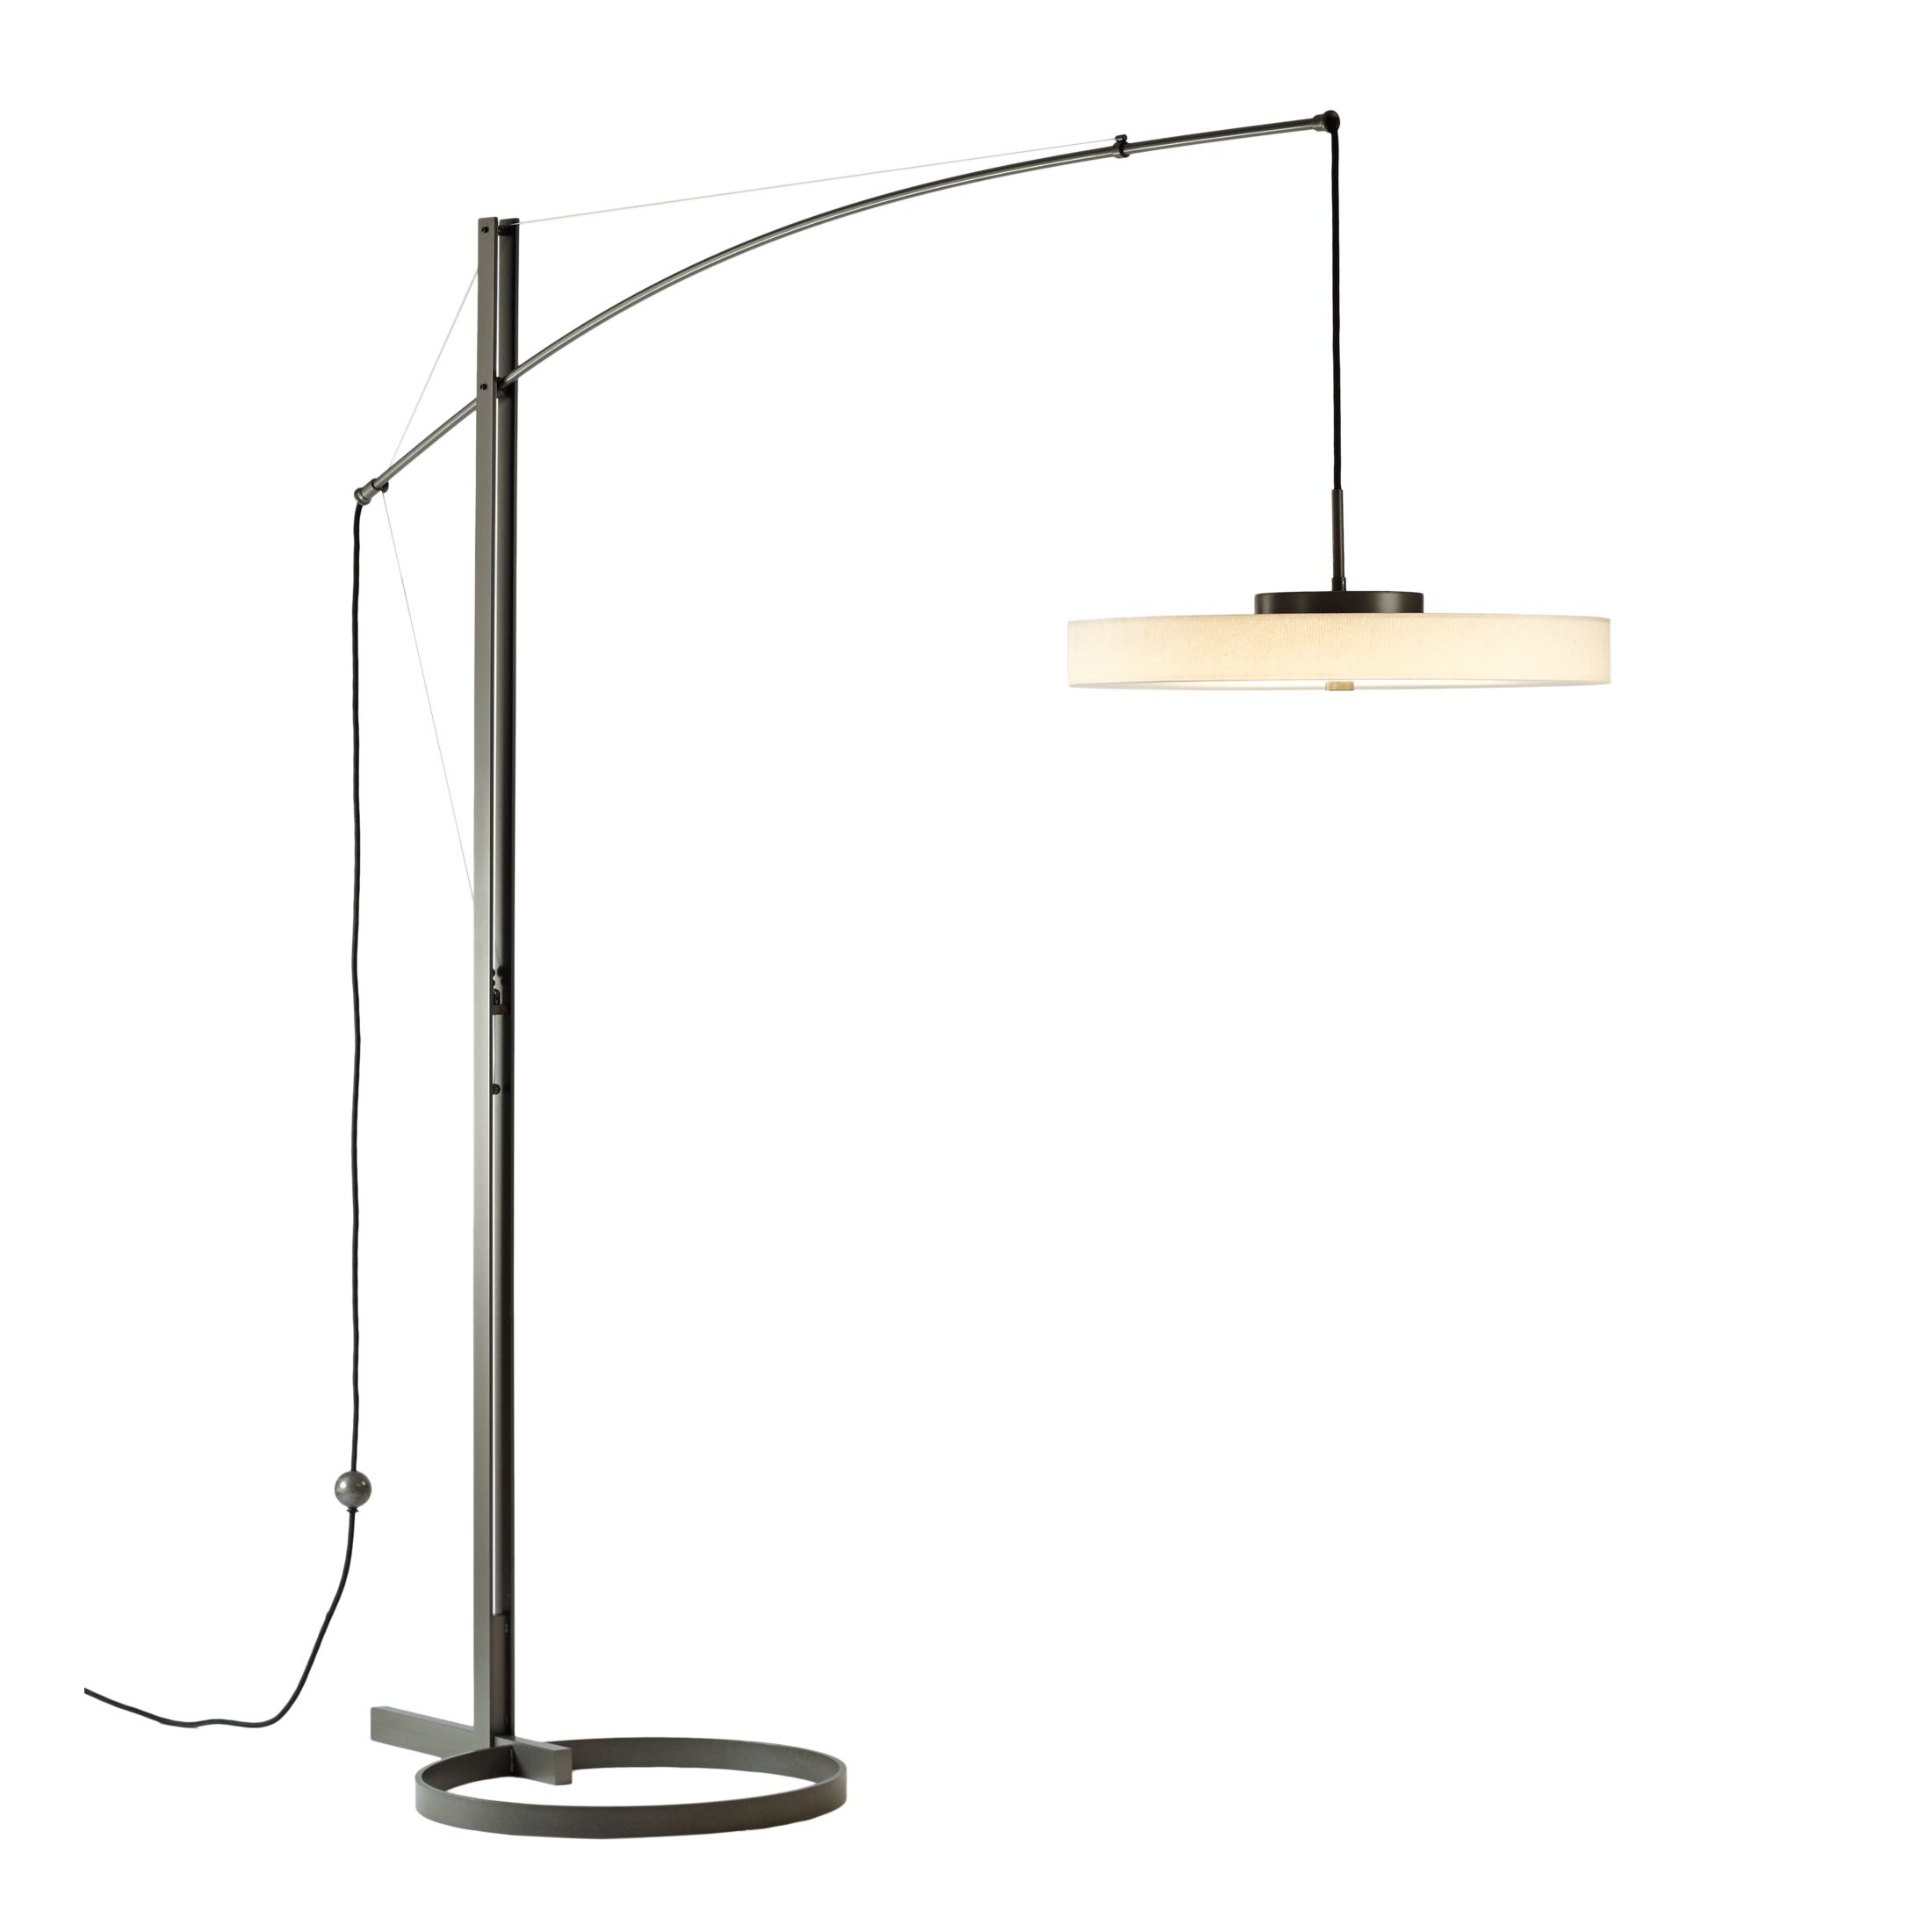 Reach Floor Lamp Hubbardton Forge throughout sizing 2200 X 2200